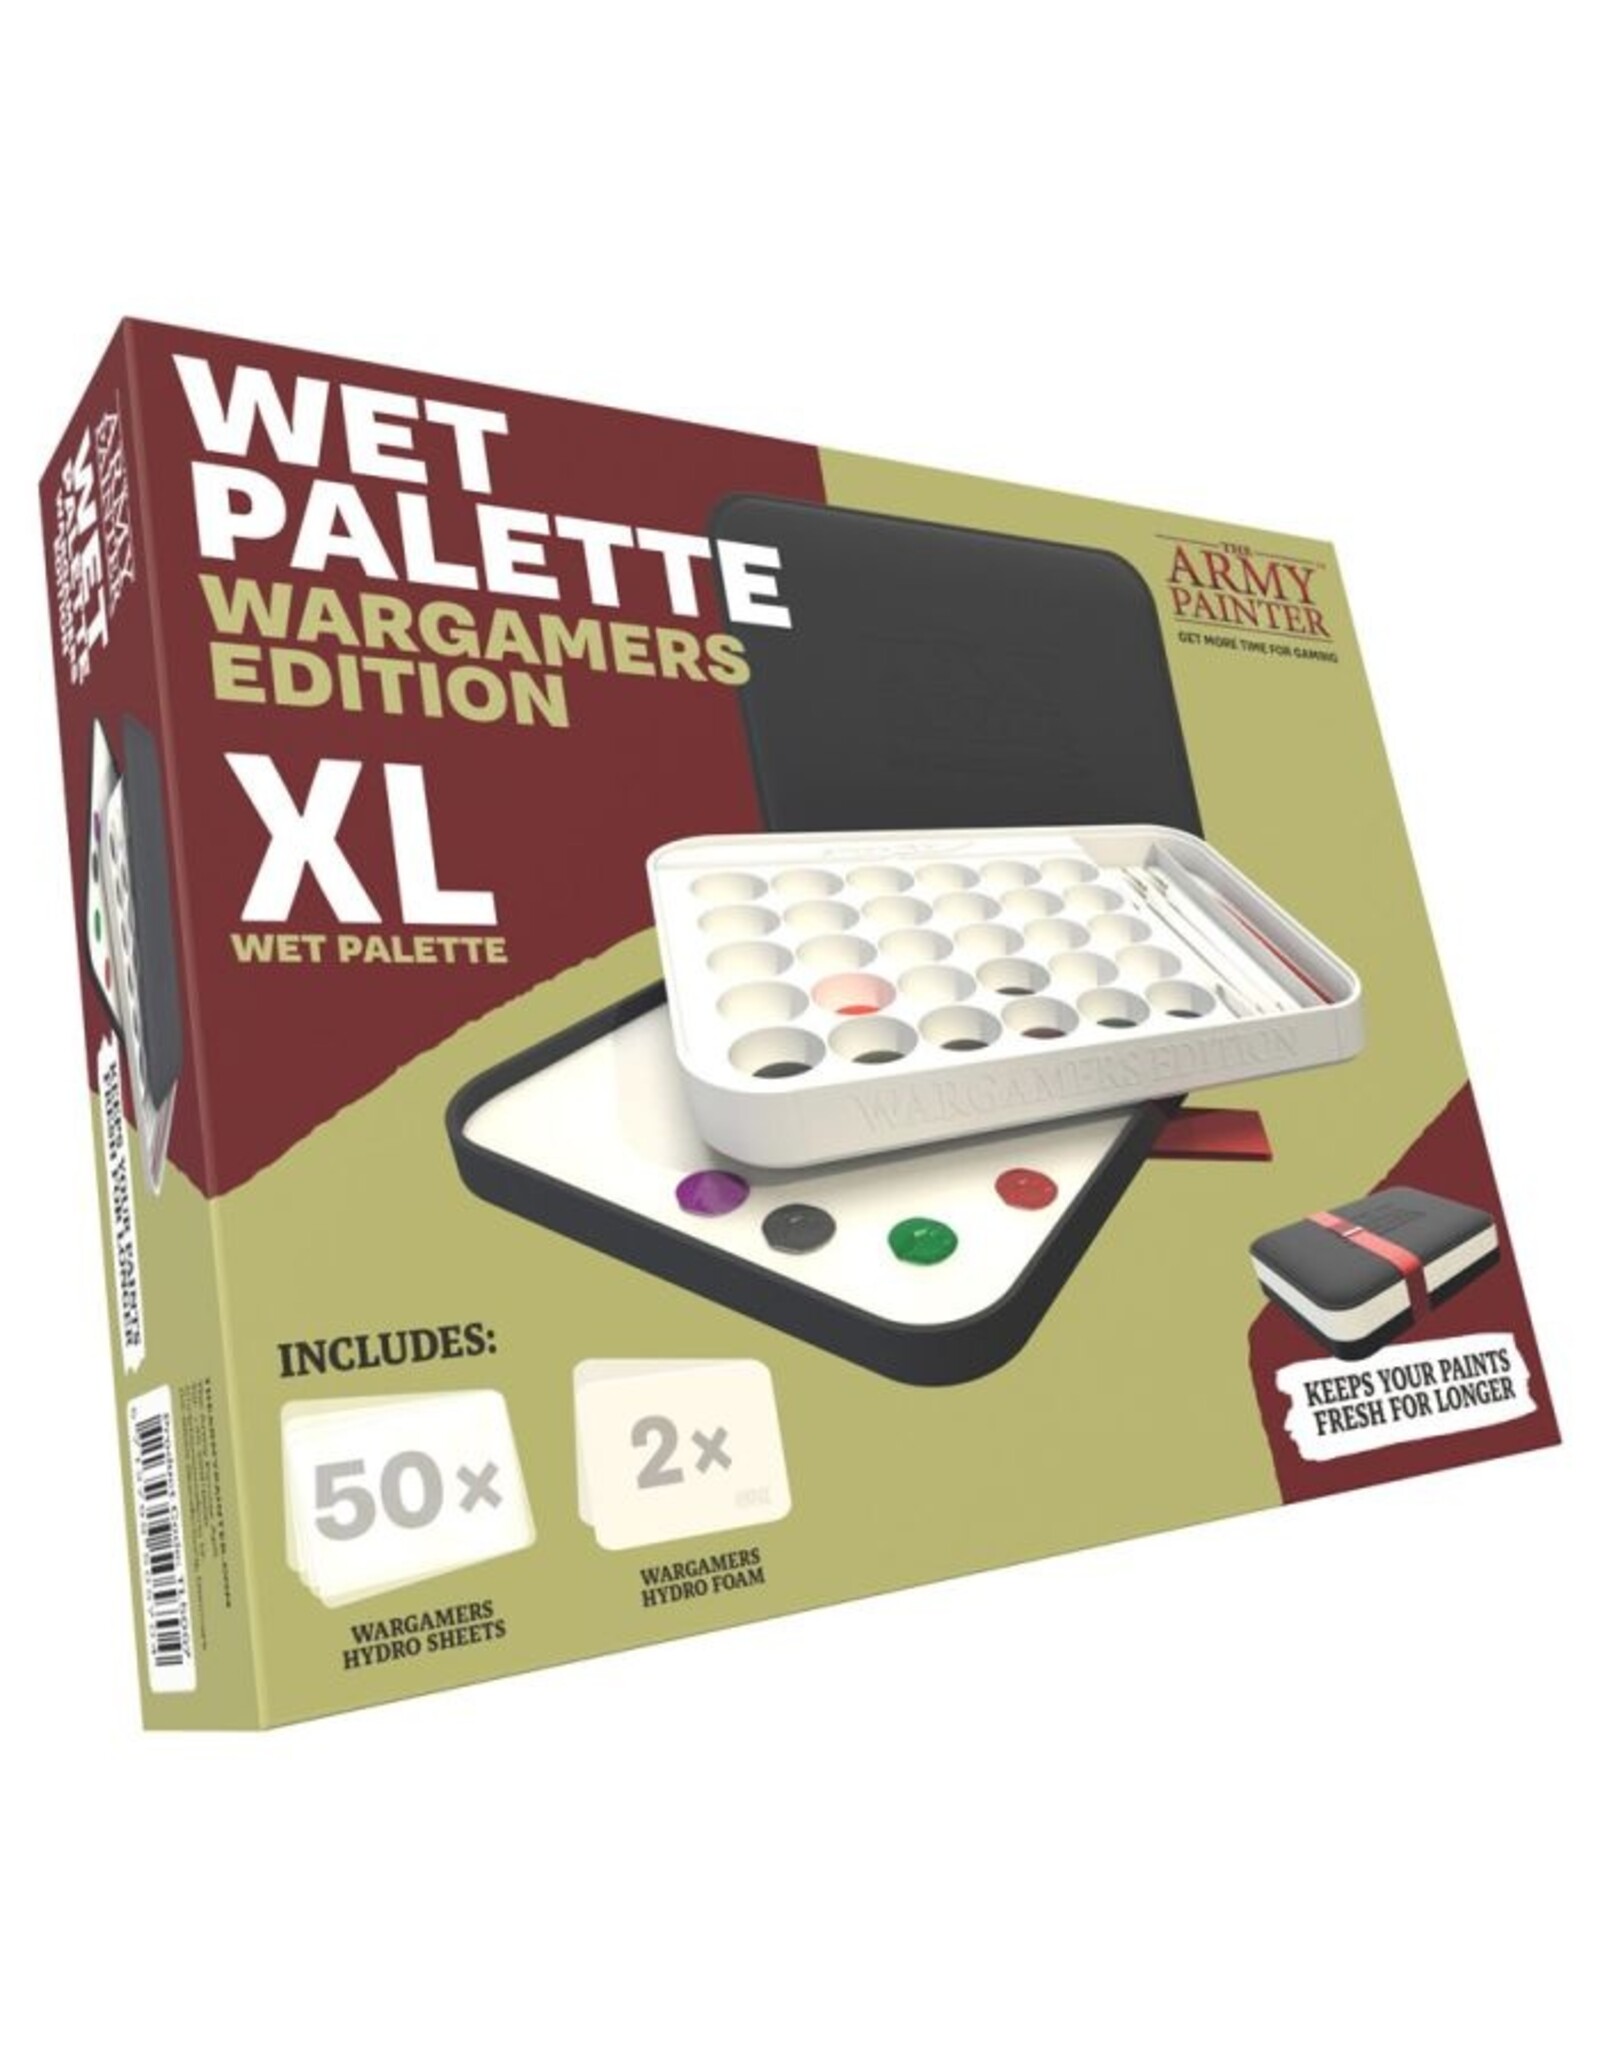 Army Painter Wet Palette: Wargamers Edition